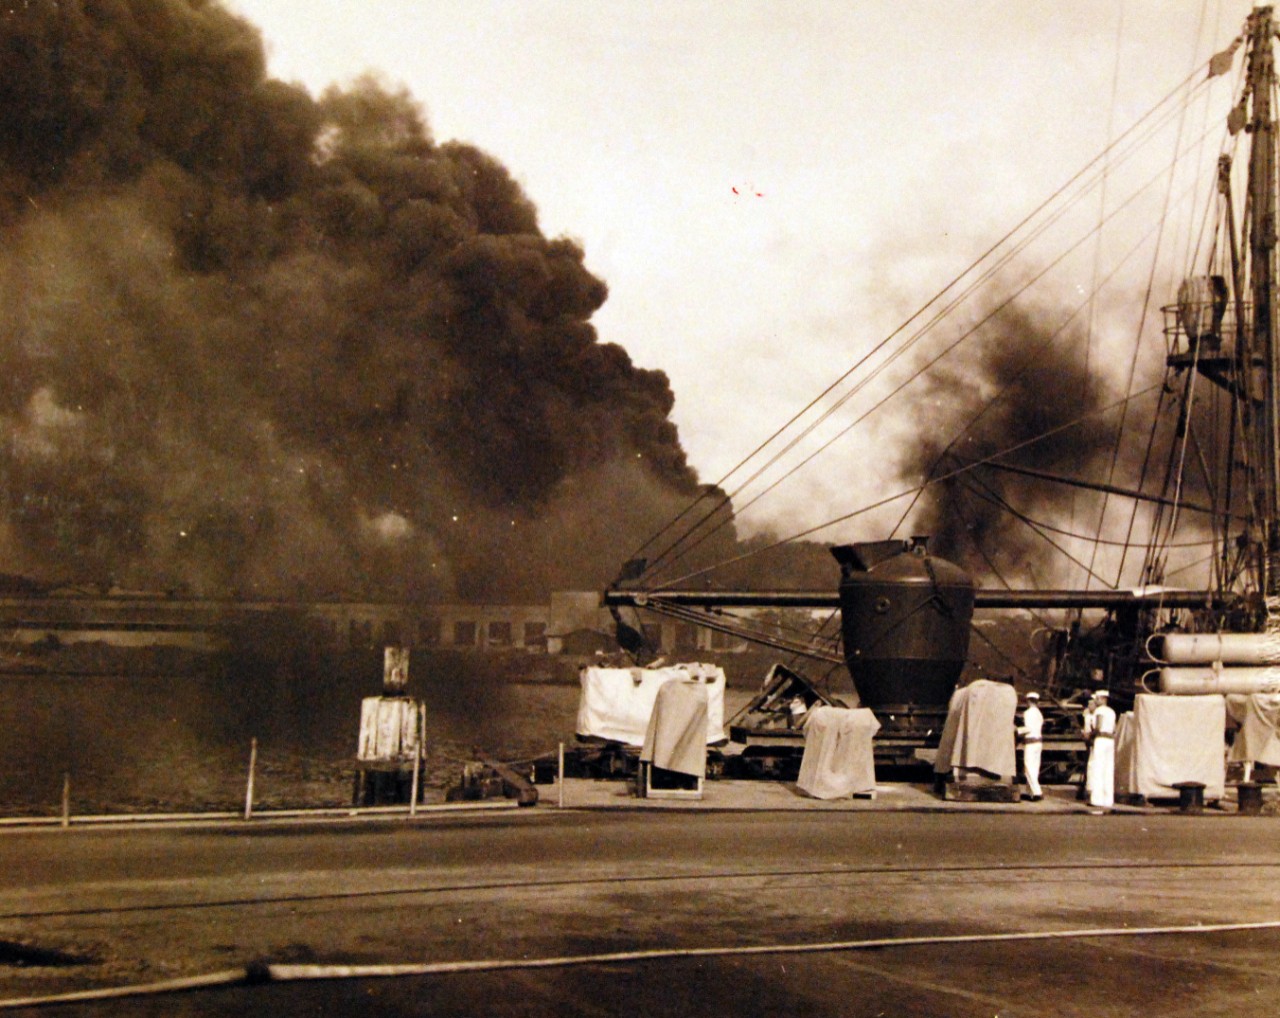 80-G-32728:   Japanese Attack on Pearl Harbor, December 7, 1941.   This view looks towards Magazine Island from the Submarine Base.  USS Widgeon (ASR 1) is in the foreground.  Smoke from the burning ships darkens the sky.   Official U.S. Navy photograph, now in the collections of the National Archives.             (9/9/2015).